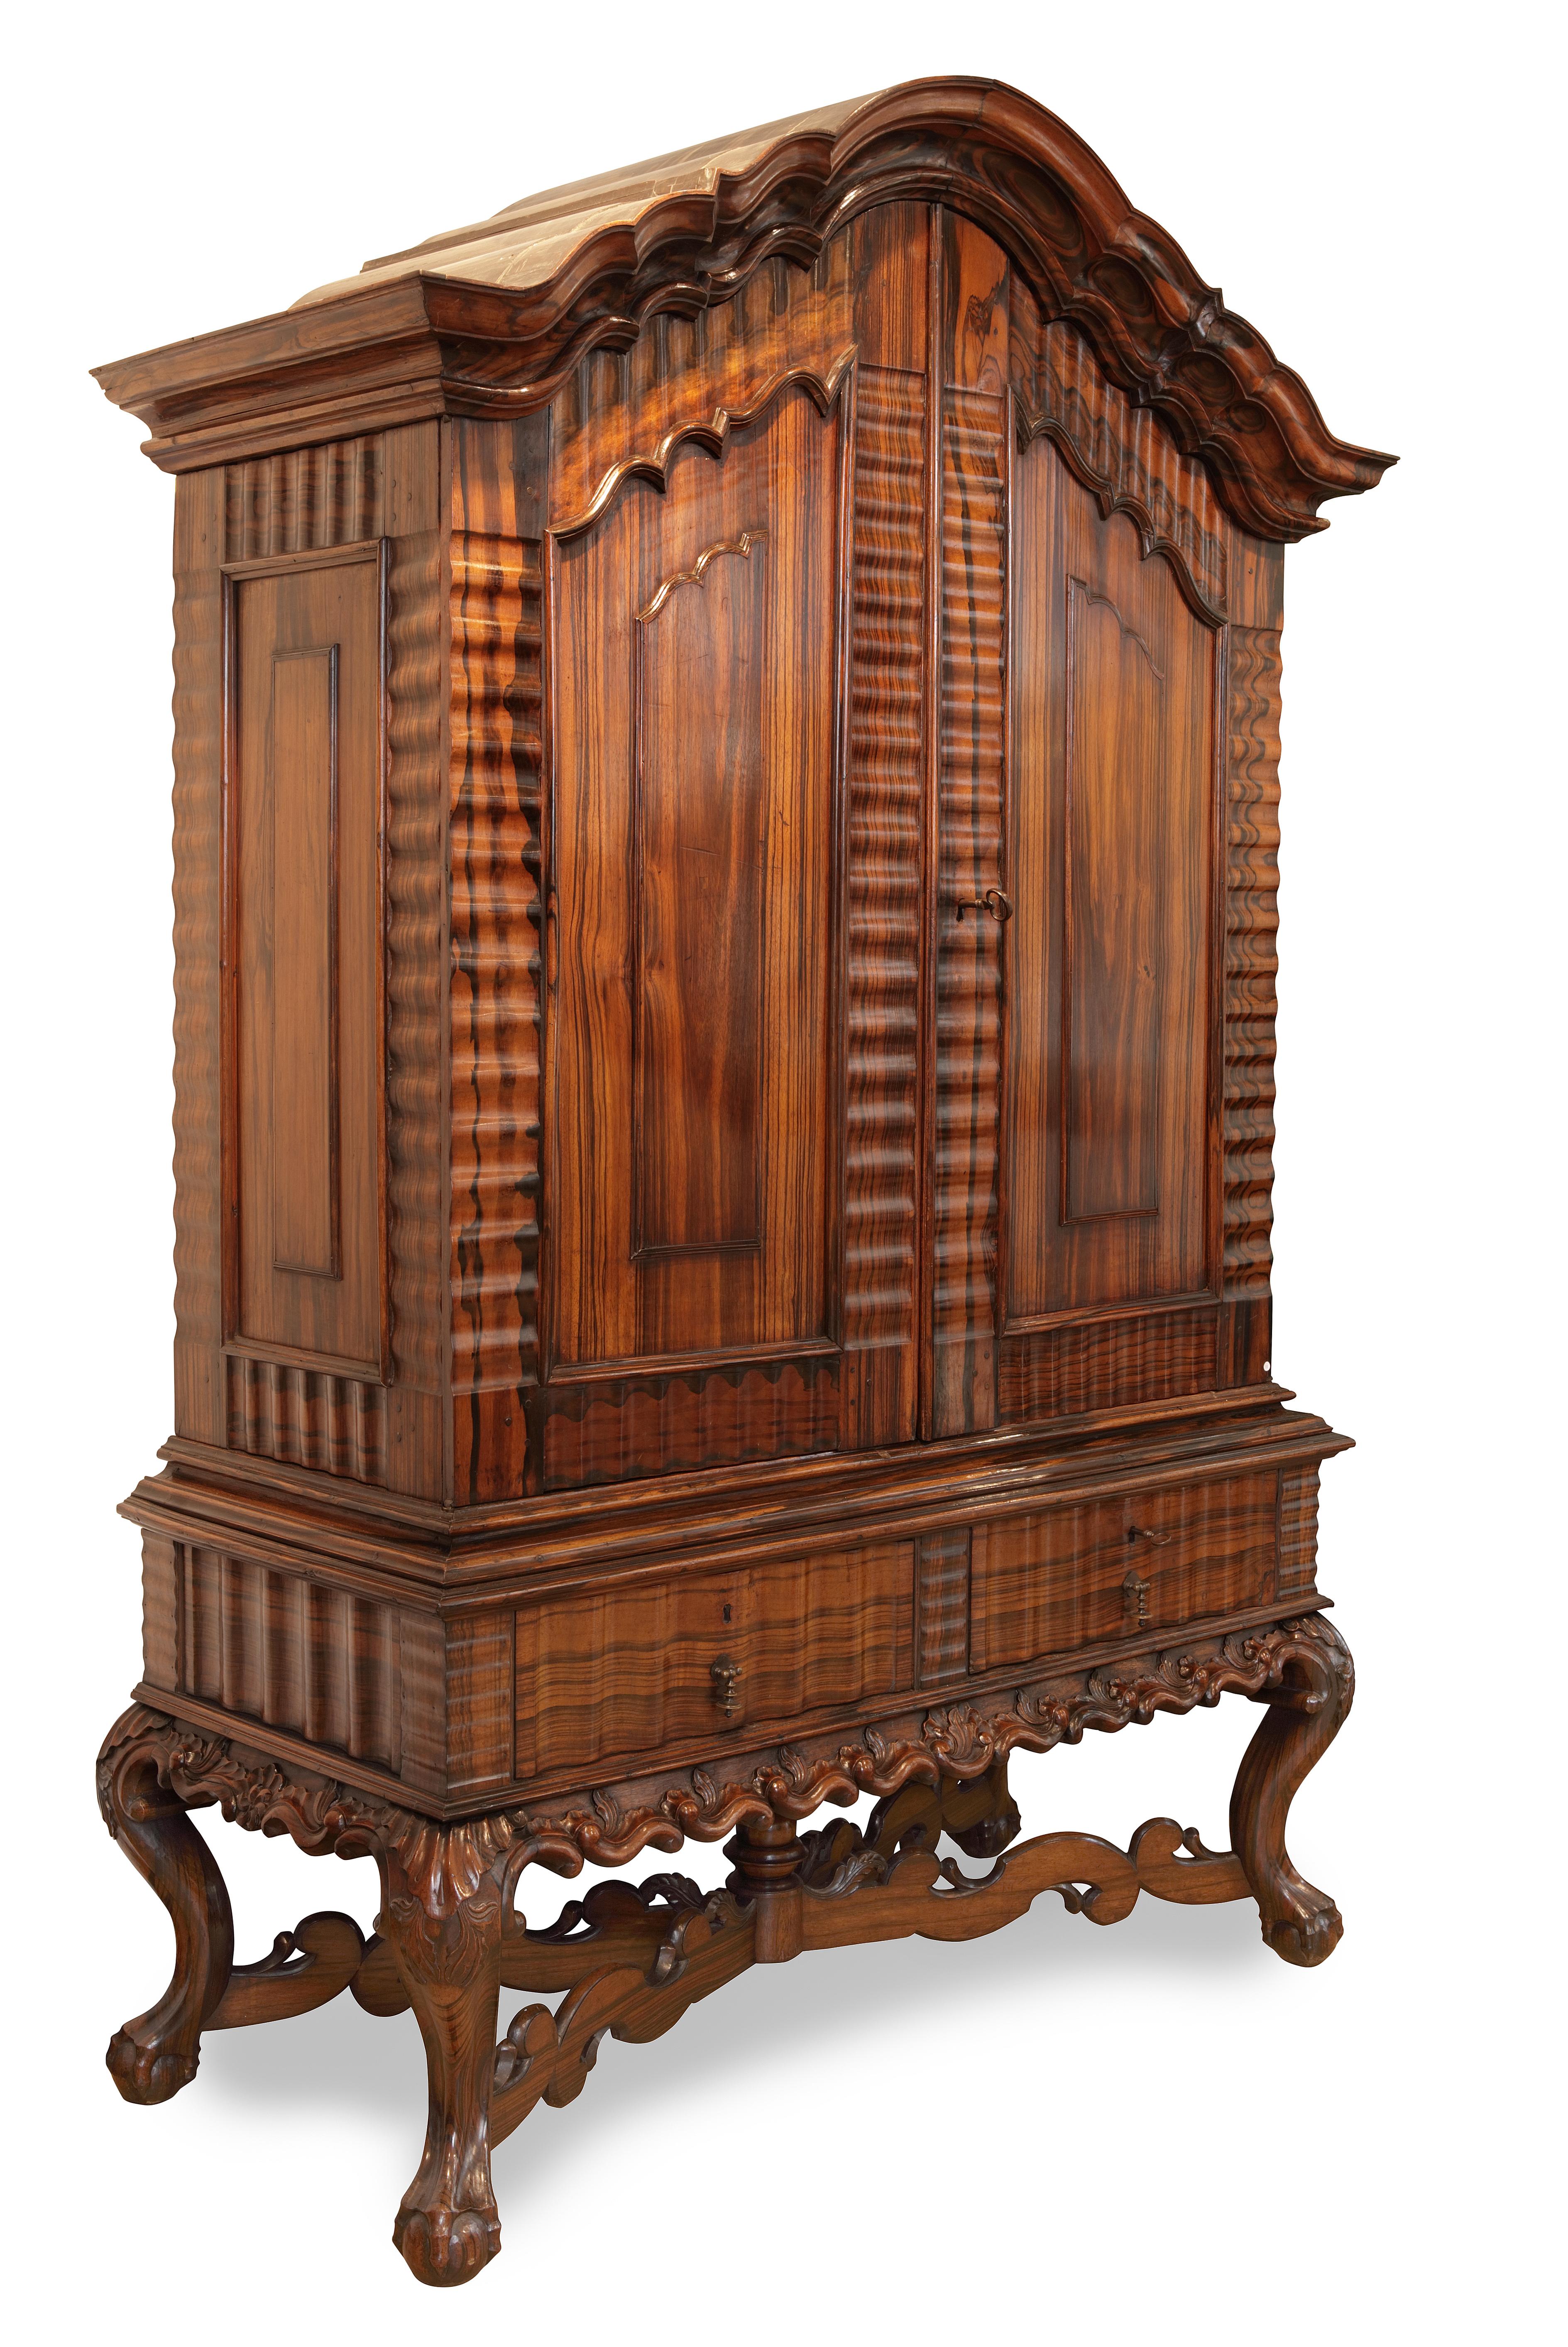 A magnificent Coromandel cabinet on stand Sri Lanka, mid-18th century

Measures: H 234 x W 147 x D 79 cm (can be taken apart)

The typical Dutch colonial cupboard with two doors, surmounted by an architectural stepped pediment and resting on a